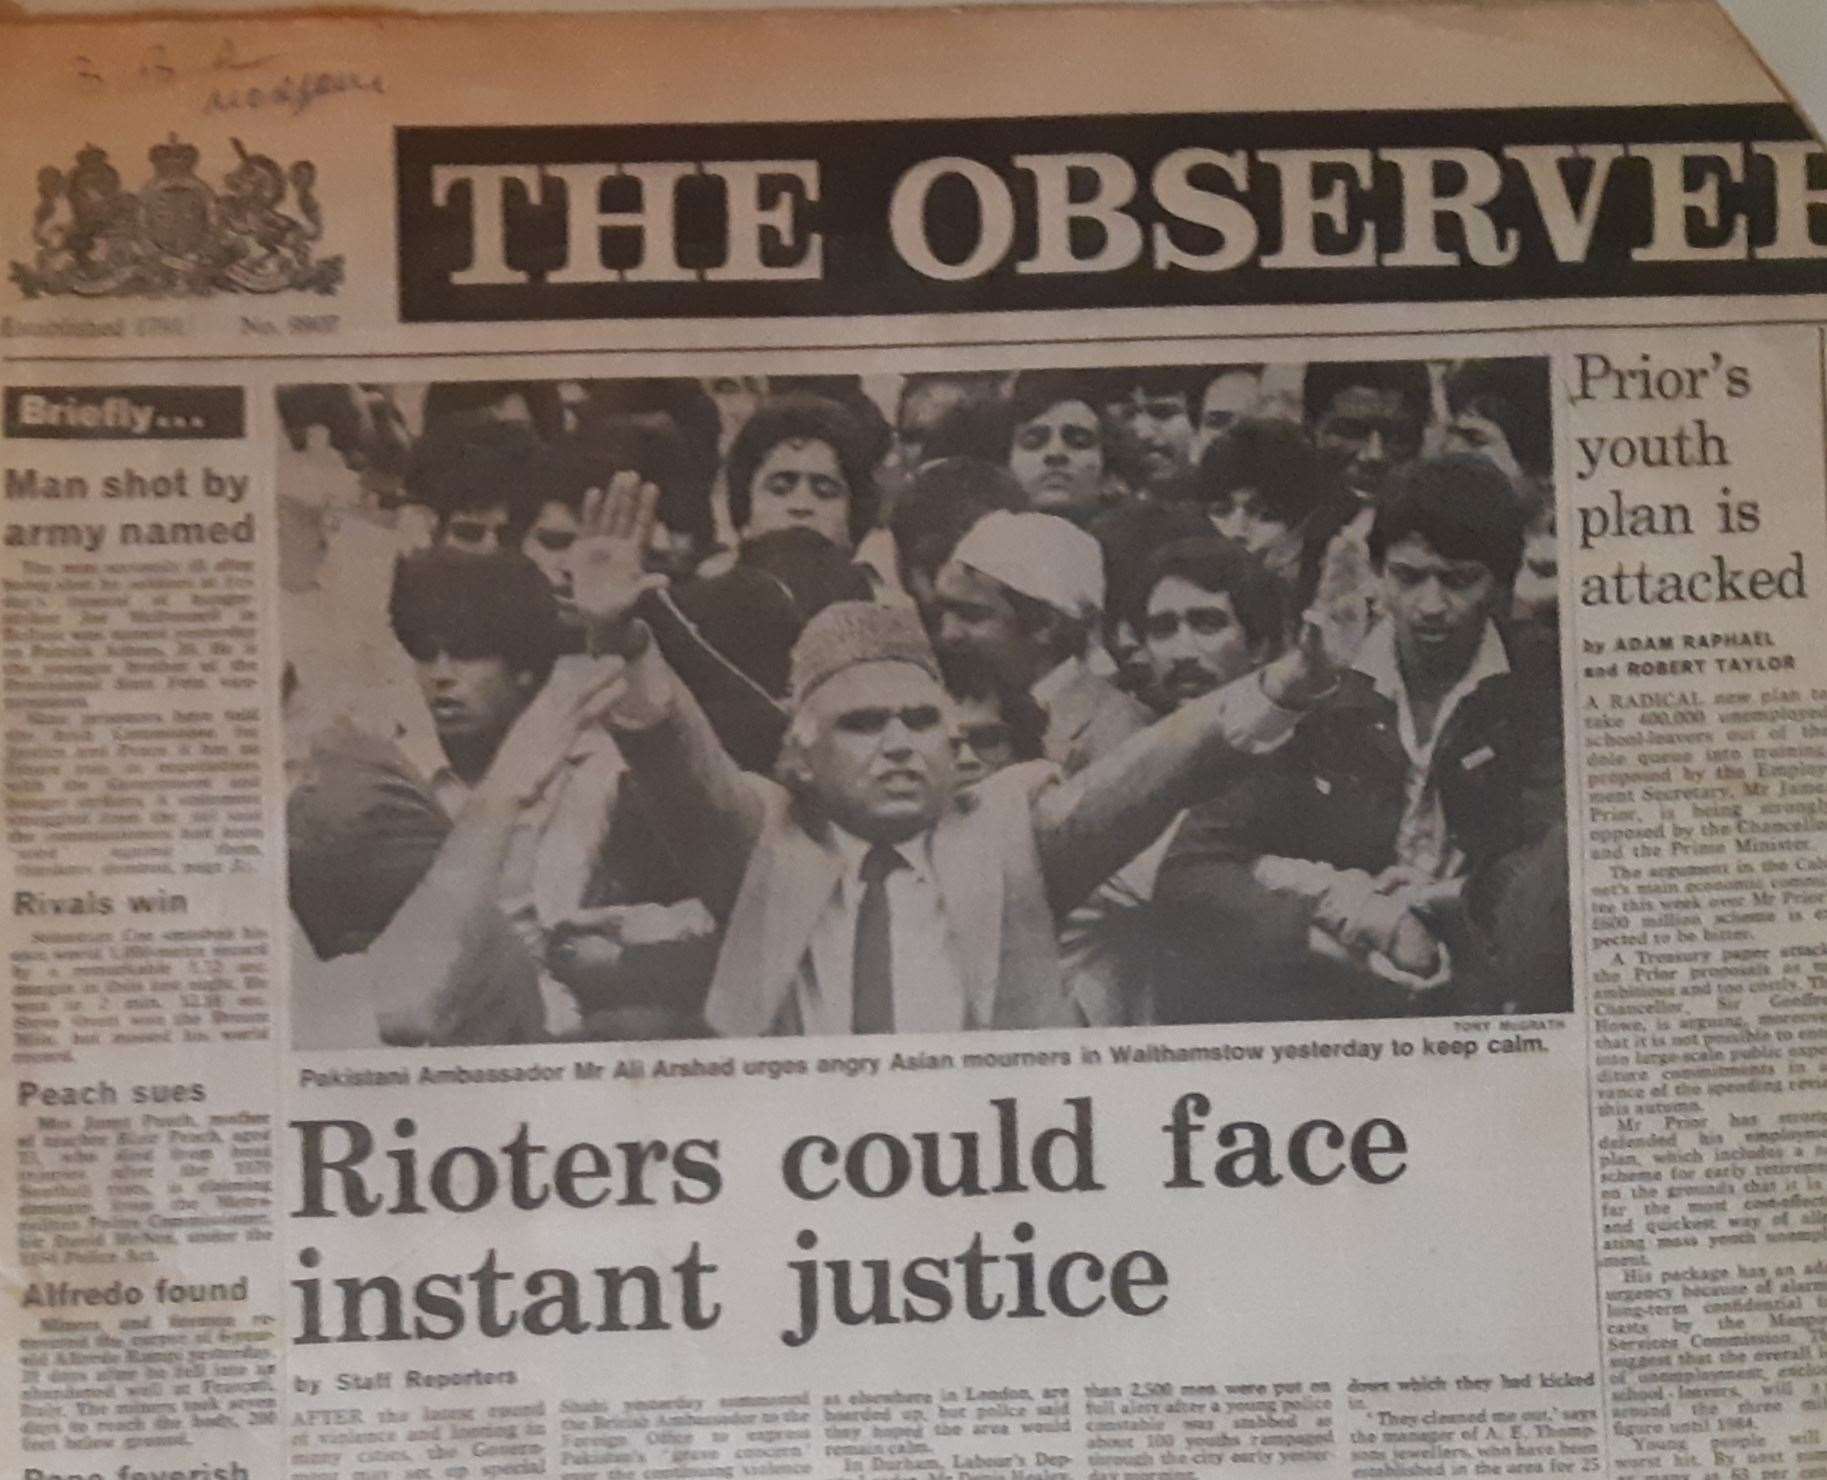 The Observer on July 12, 1981 shows Pakistani ambassador pleading for calm among mourners following a multiple racial murder in Walthamstow, just before the riots